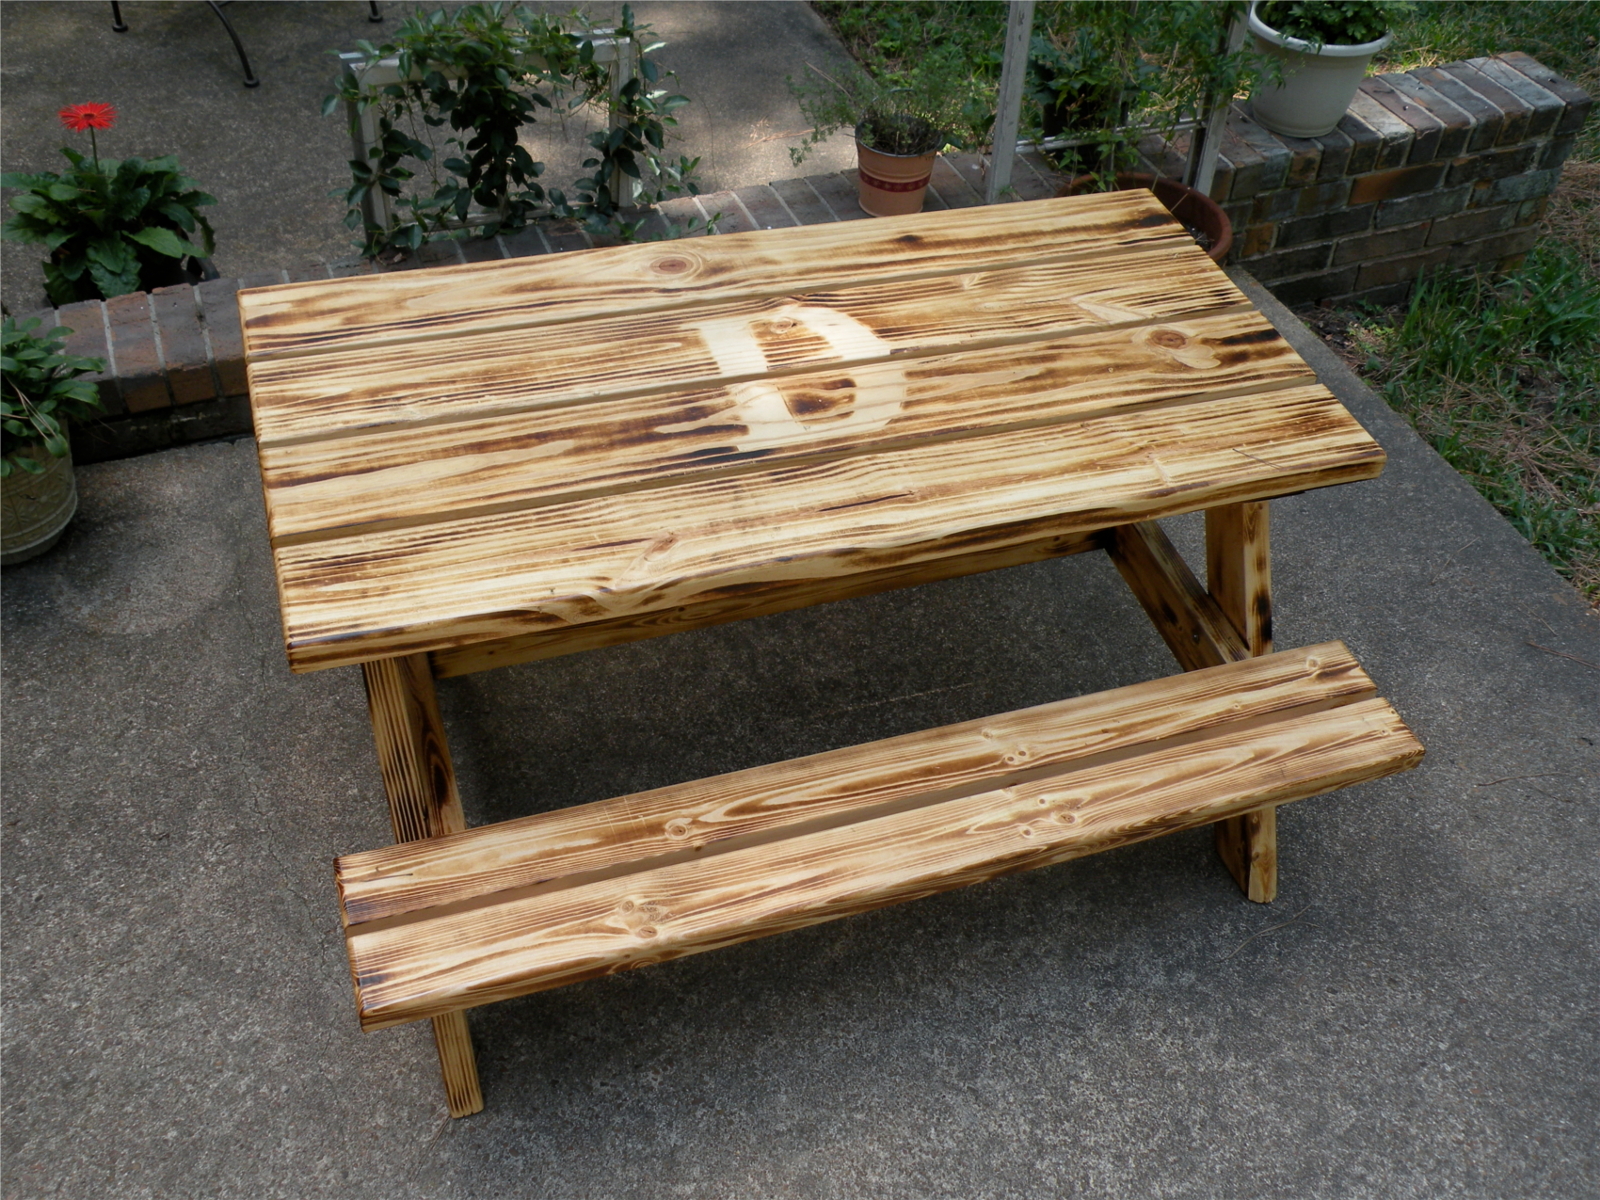 Child Picnic Table  Do It Yourself Home Projects from Ana White